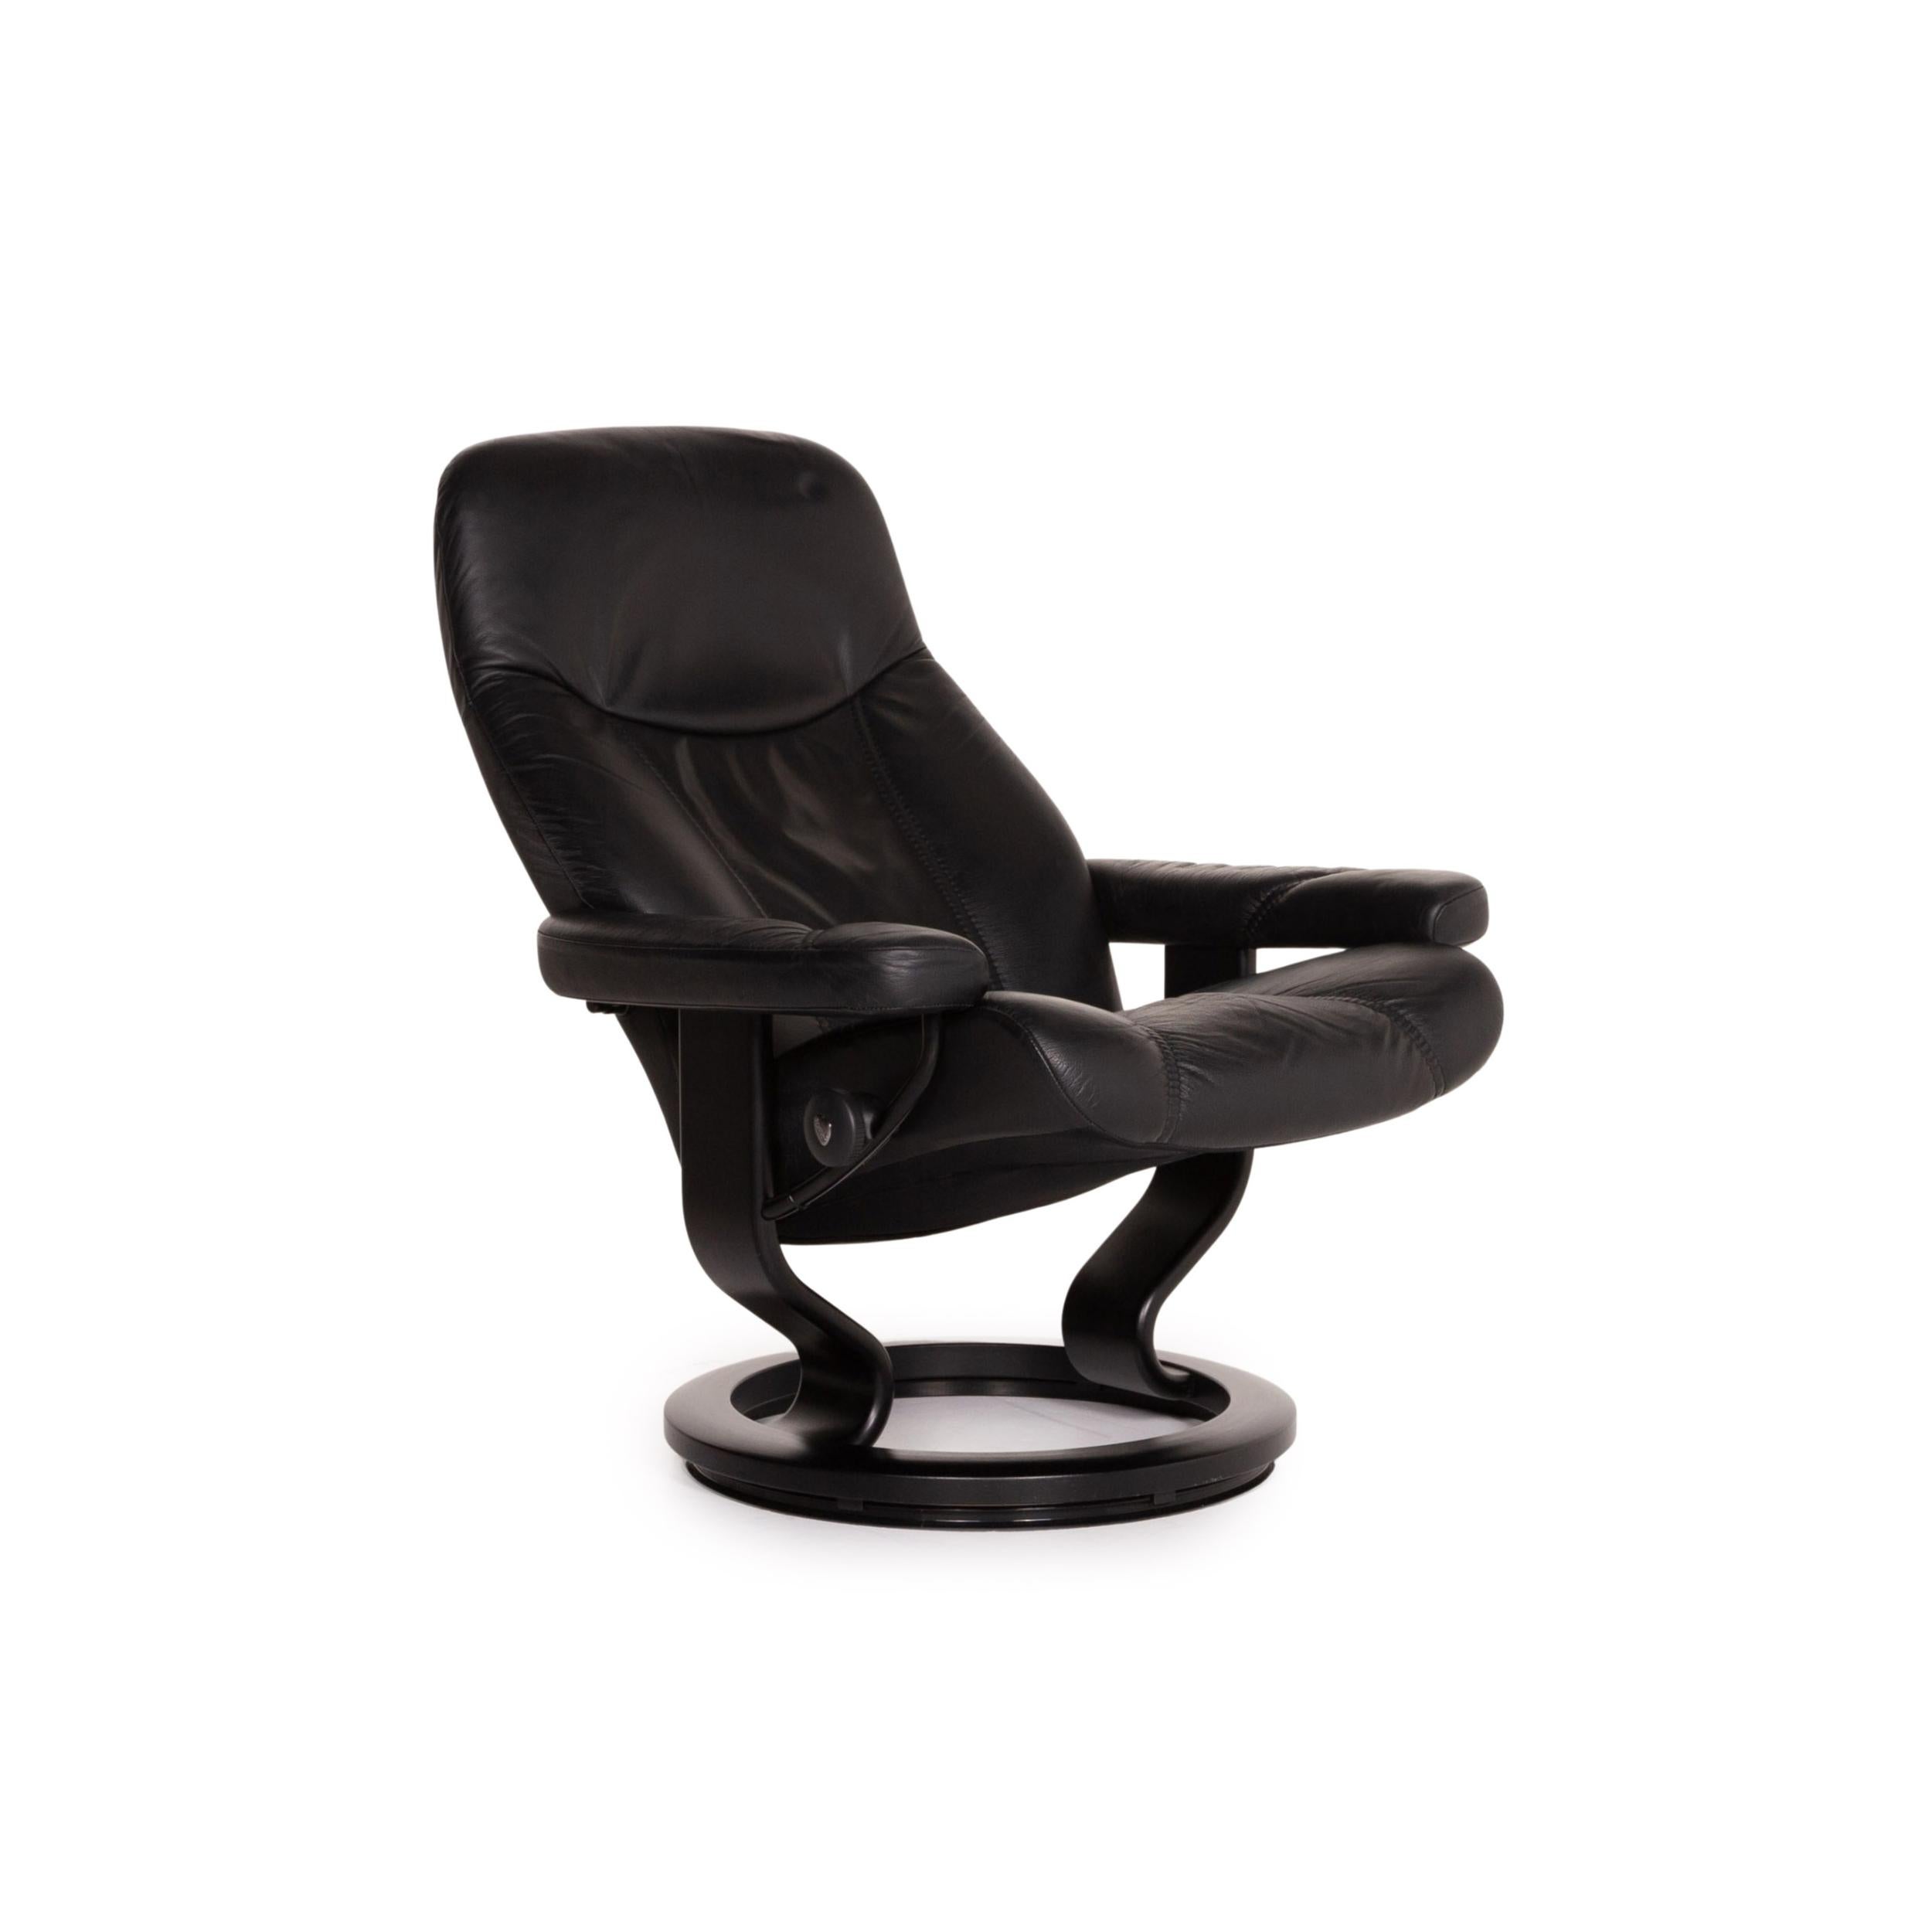 Modern Stressless Consul Leather Armchair Incl. Stool Black Function Relaxation For Sale